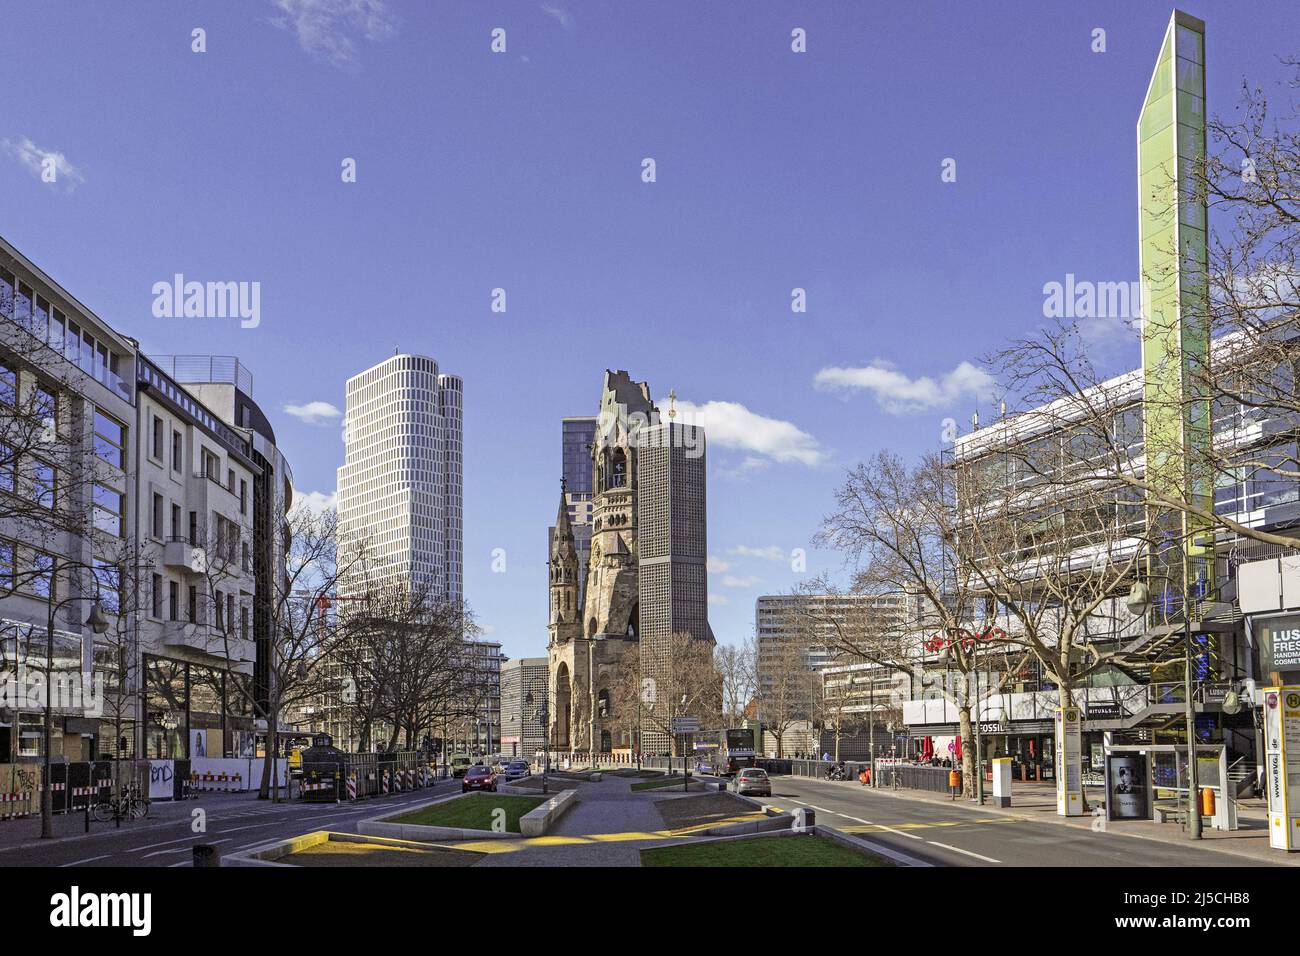 Germany, Berlin, 22.03.2020. Tauentzienstrasse in the time of the Corona Virus Pandemic on 22.03.2020. With the Hotel Berlin Upper West Motel One (left) and the Kaiser Wilhelm Memorial Church and rightmost: the Glaeserne Obelisk, the 35 meter high column was designed in 1987 by Heinz Mack, the co-founder of the artist group Zero. At that time it was the first glazed obelisk in the world. [automated translation] Stock Photo